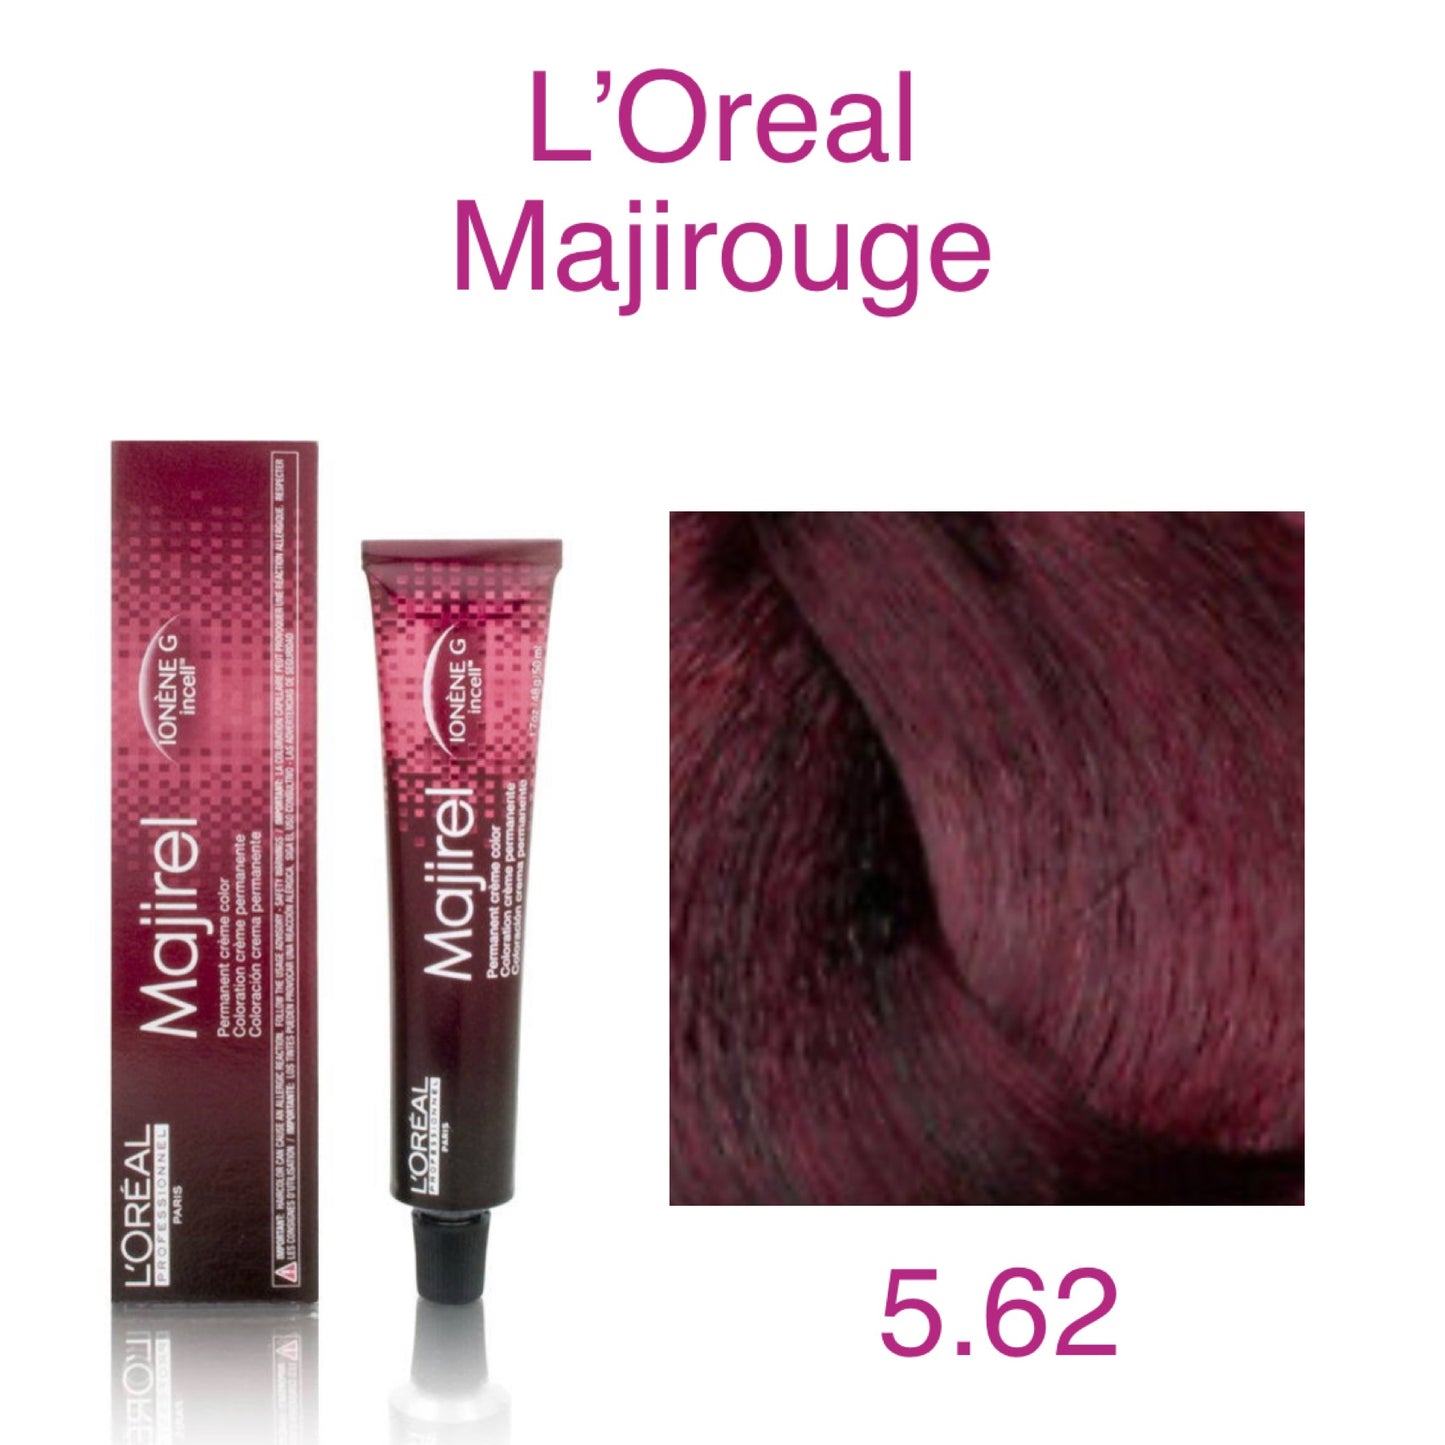 L’Oreal Majirouge Permanent Hair Colour 60ml